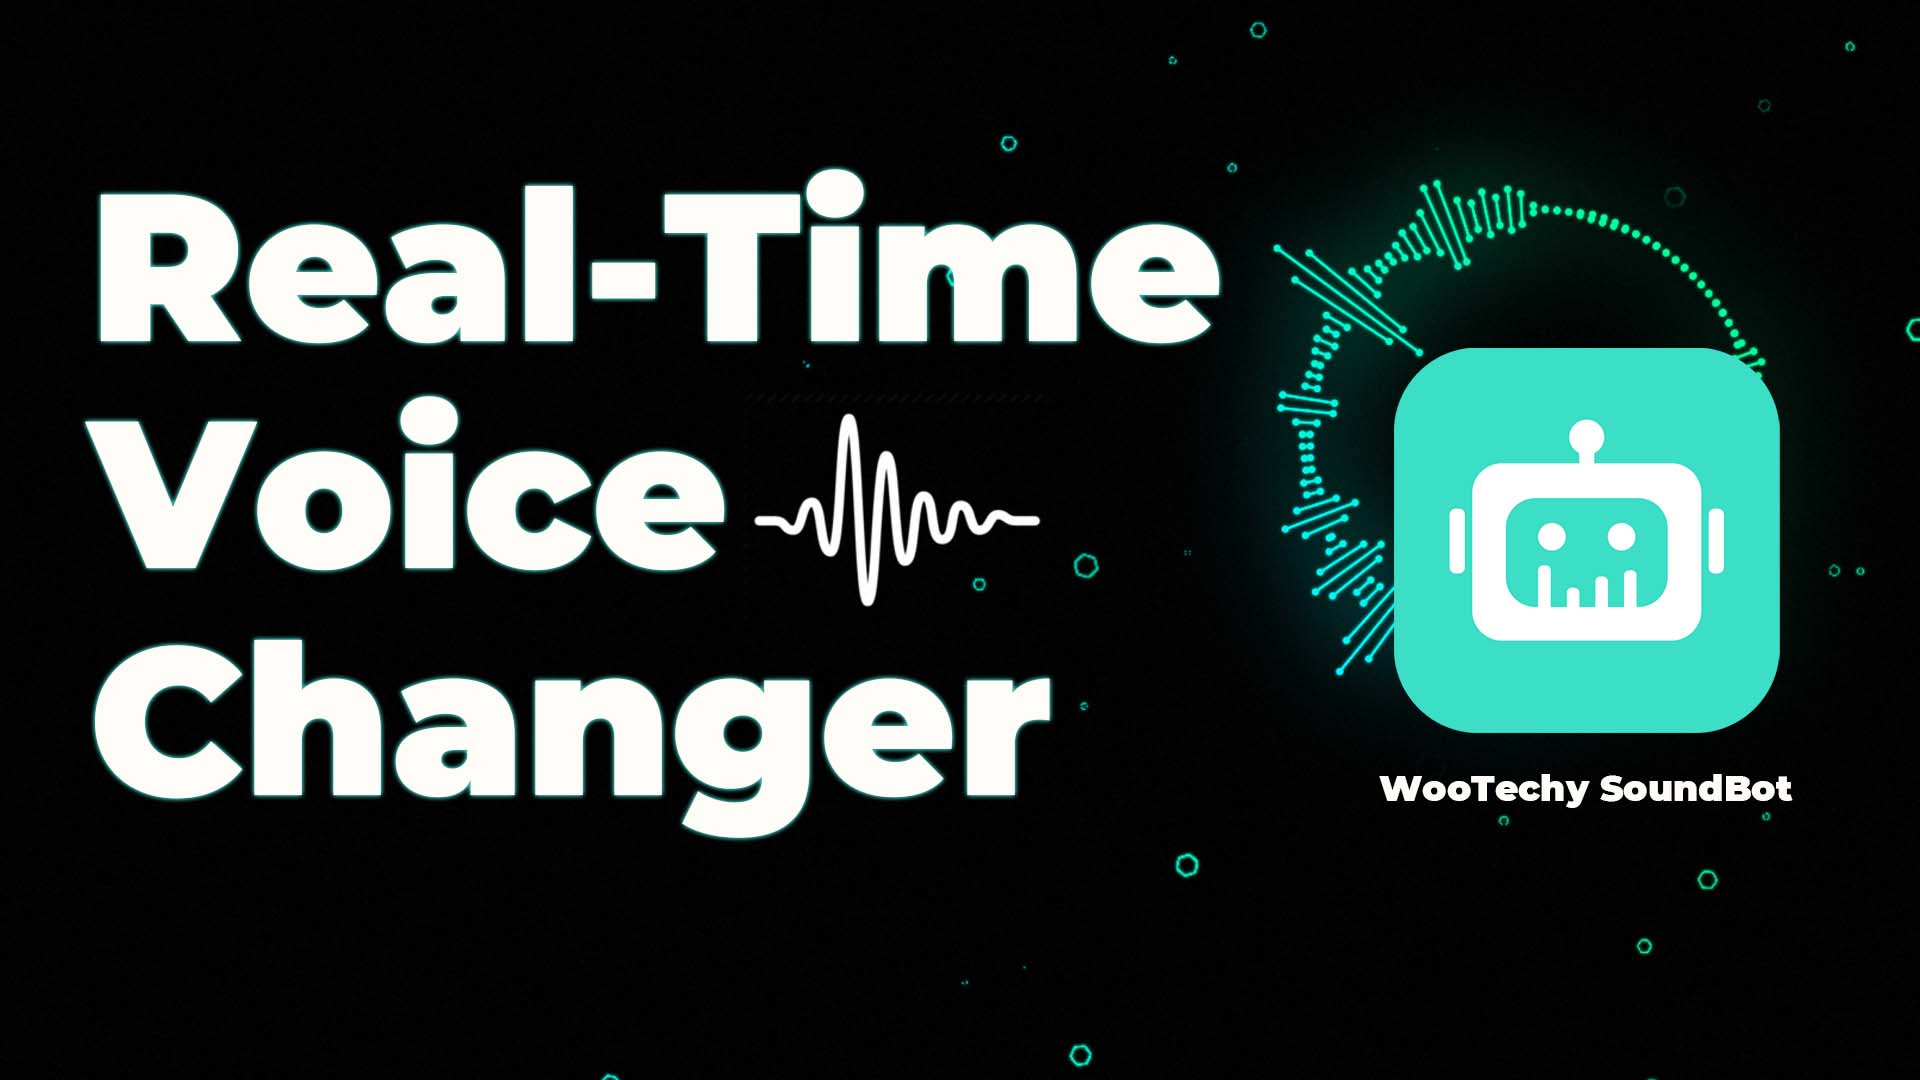 Voice of time. Voxal Voice Changer 8.00. Wootechy IDELOCK.